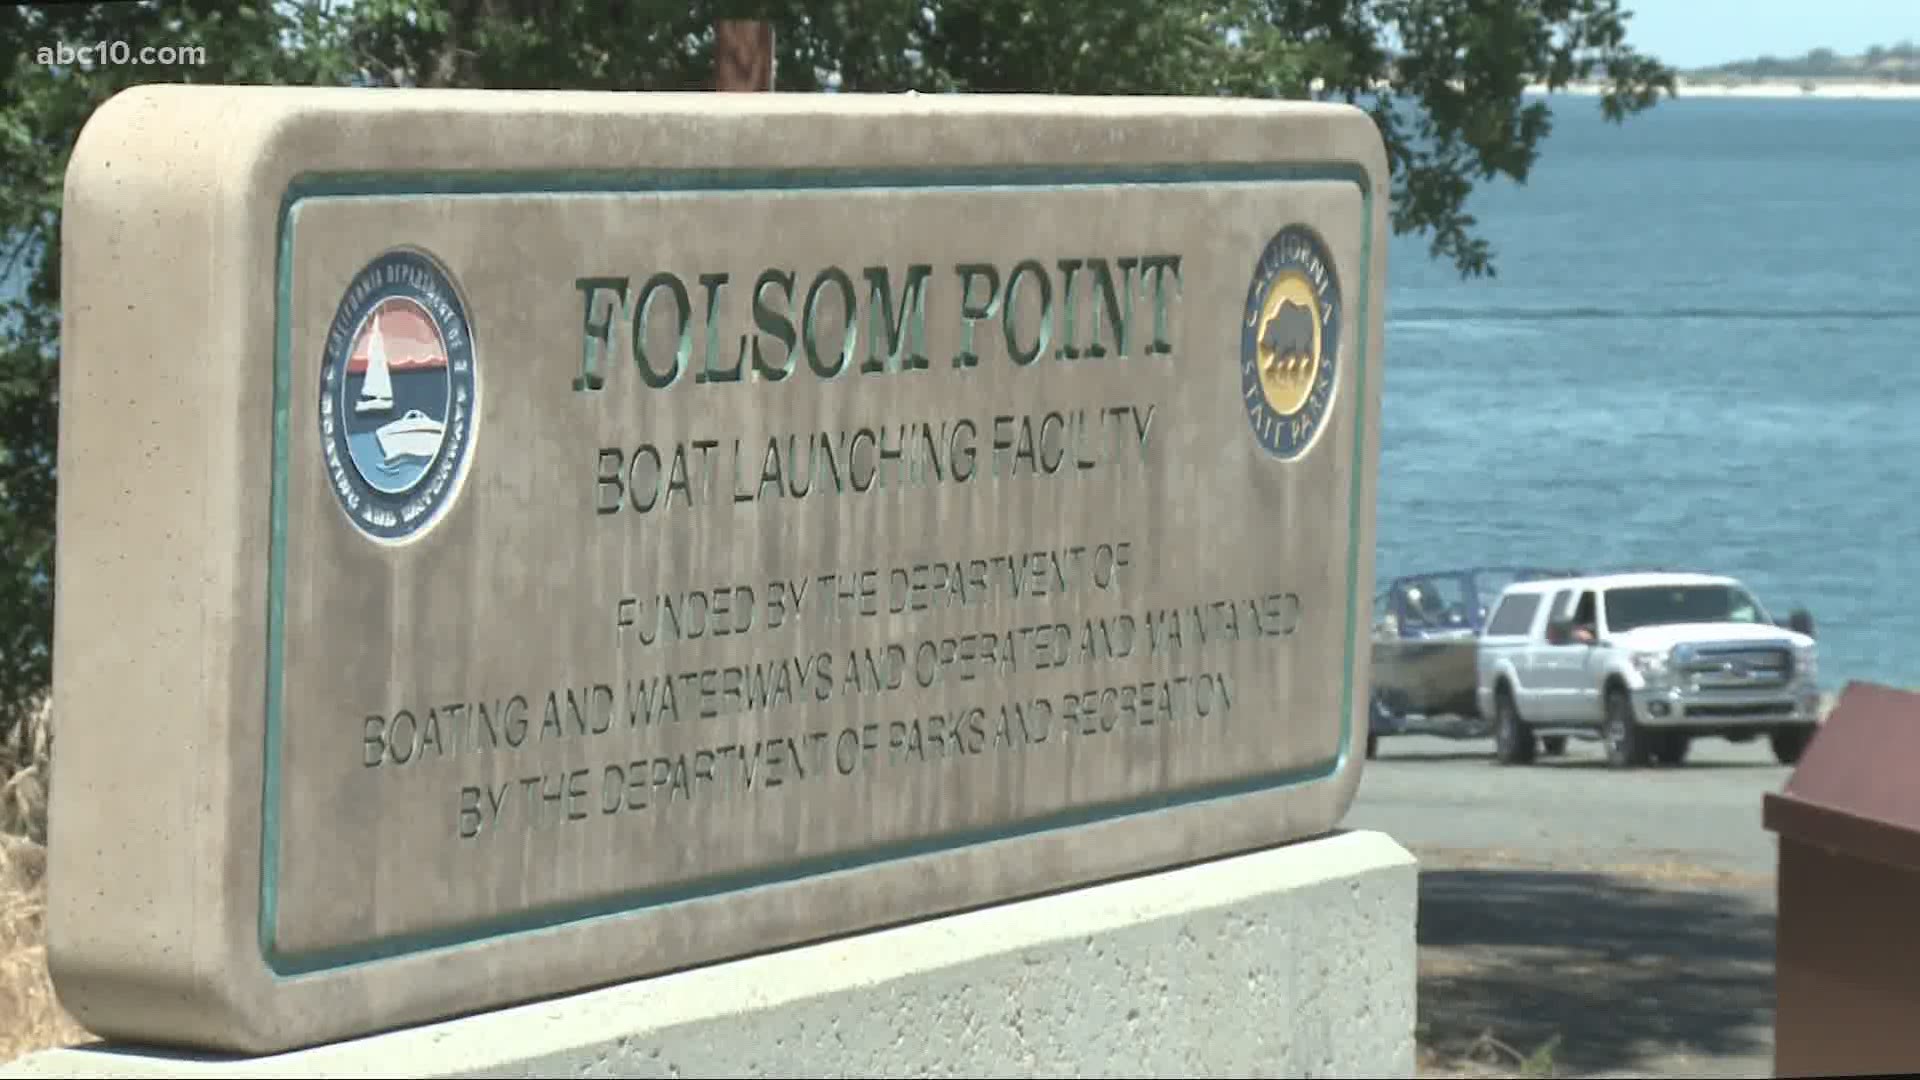 Visitors flocking to Folsom Lake to enjoy the state park's amenities are raising concern to residents who live in the surrounding area.